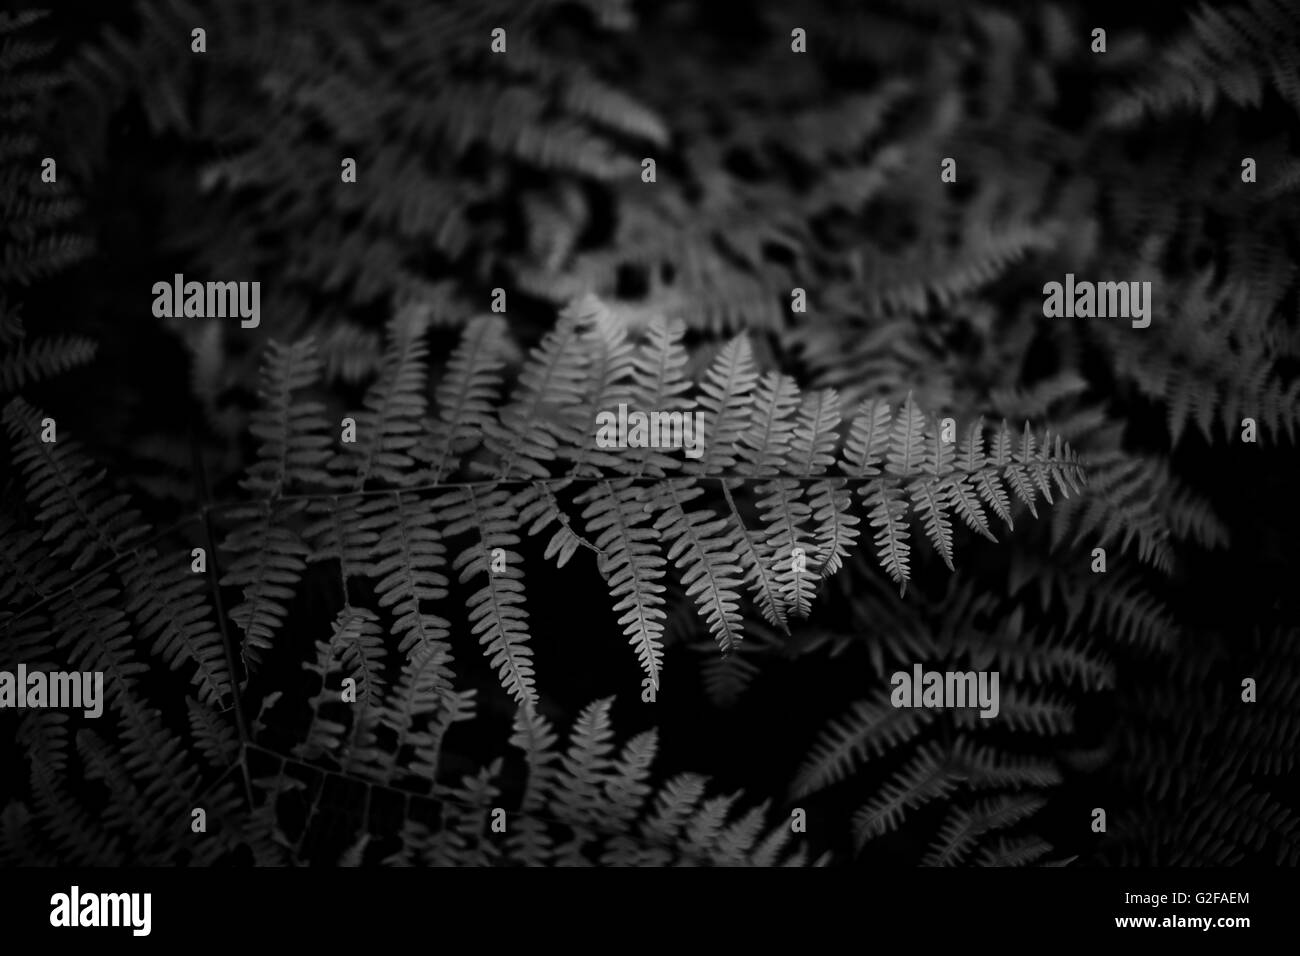 Forest Ferns Stock Photo